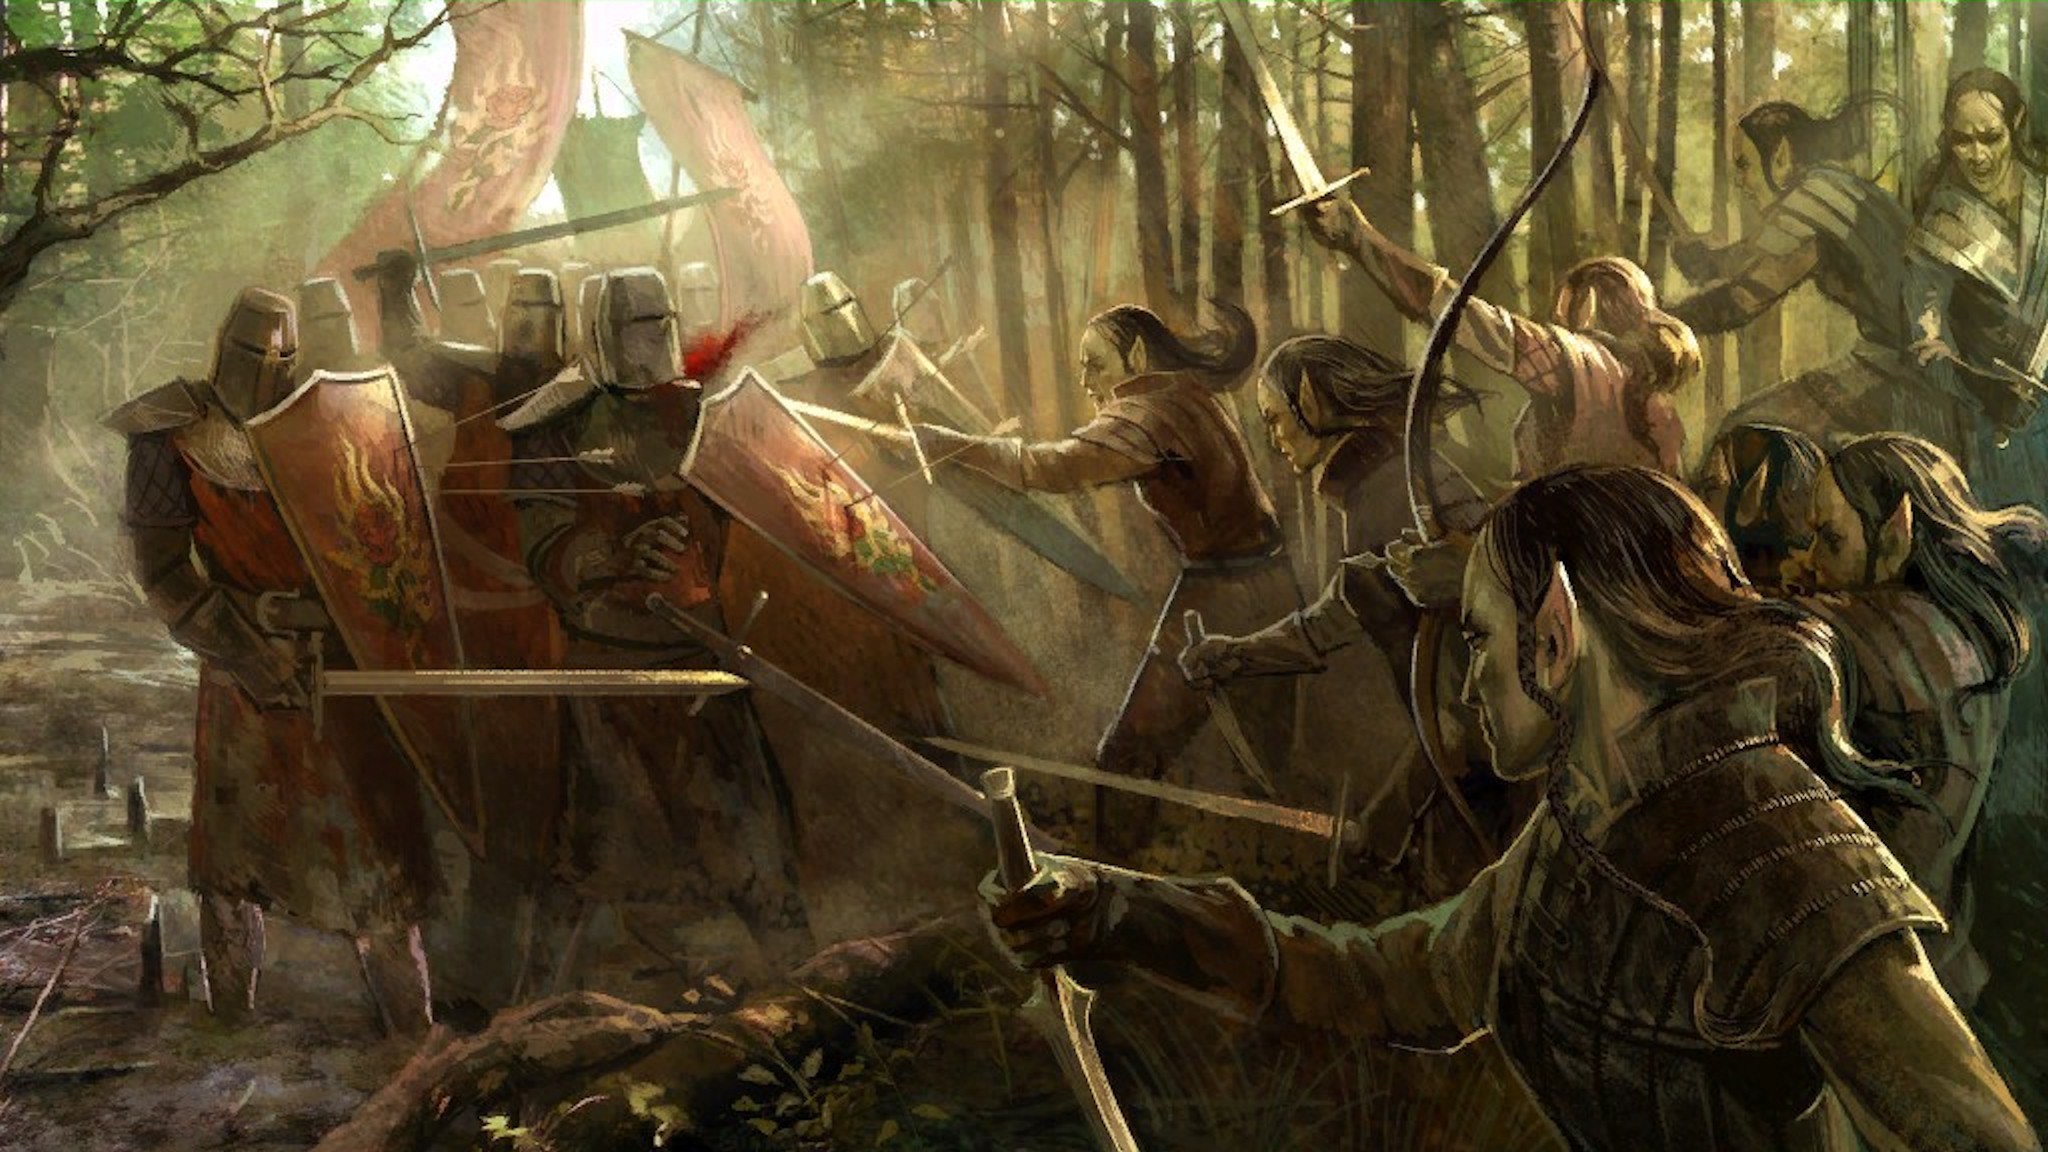 rpg wallpaper,action adventure game,strategy video game,adventure game,pc game,cg artwork